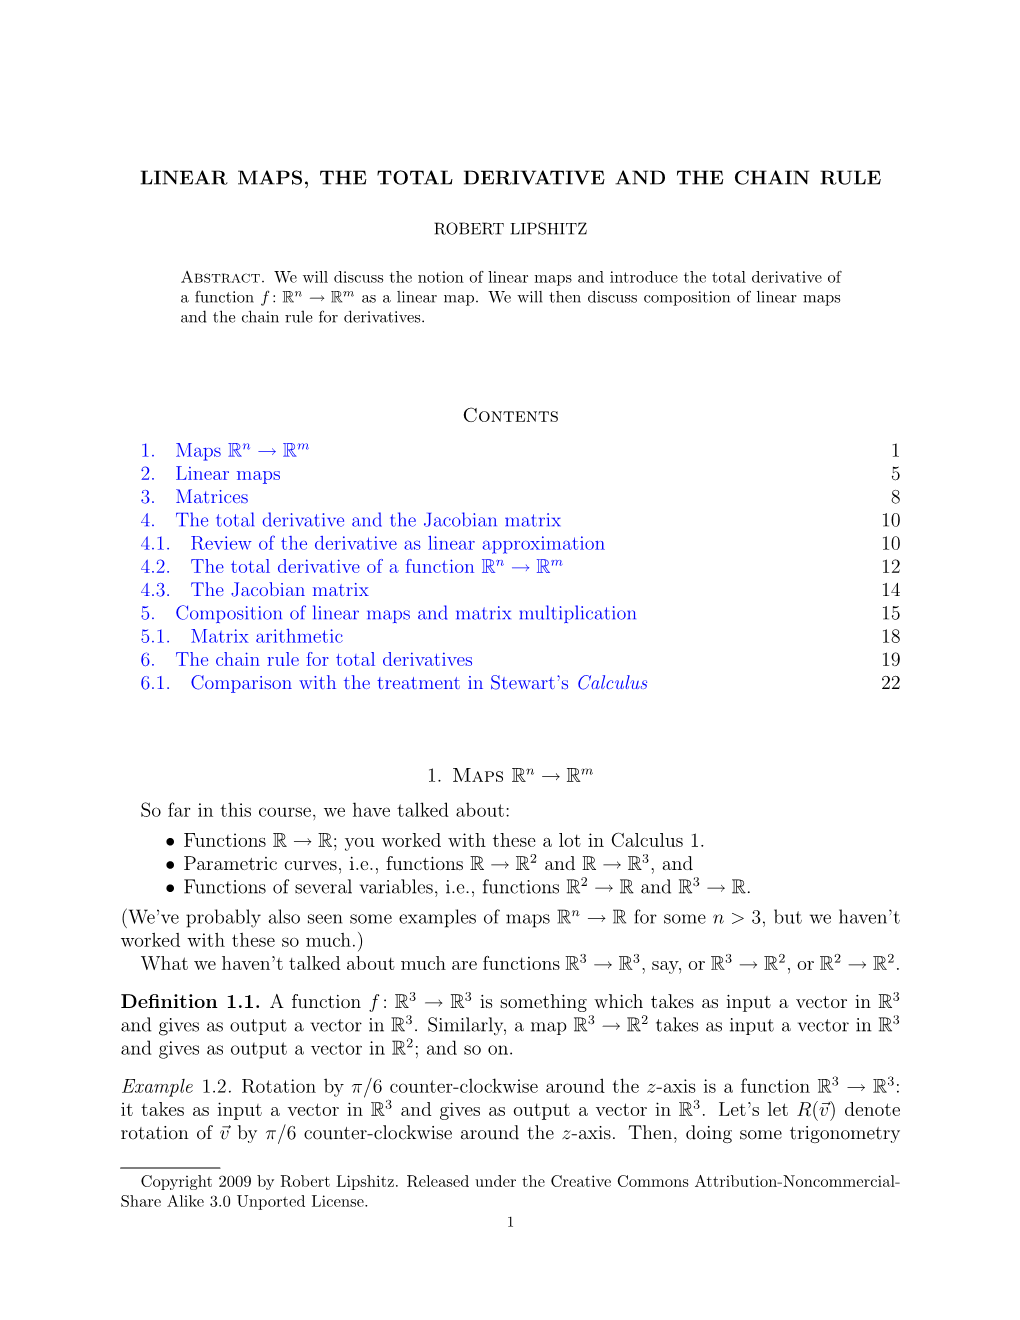 Linear Maps, the Total Derivative, And